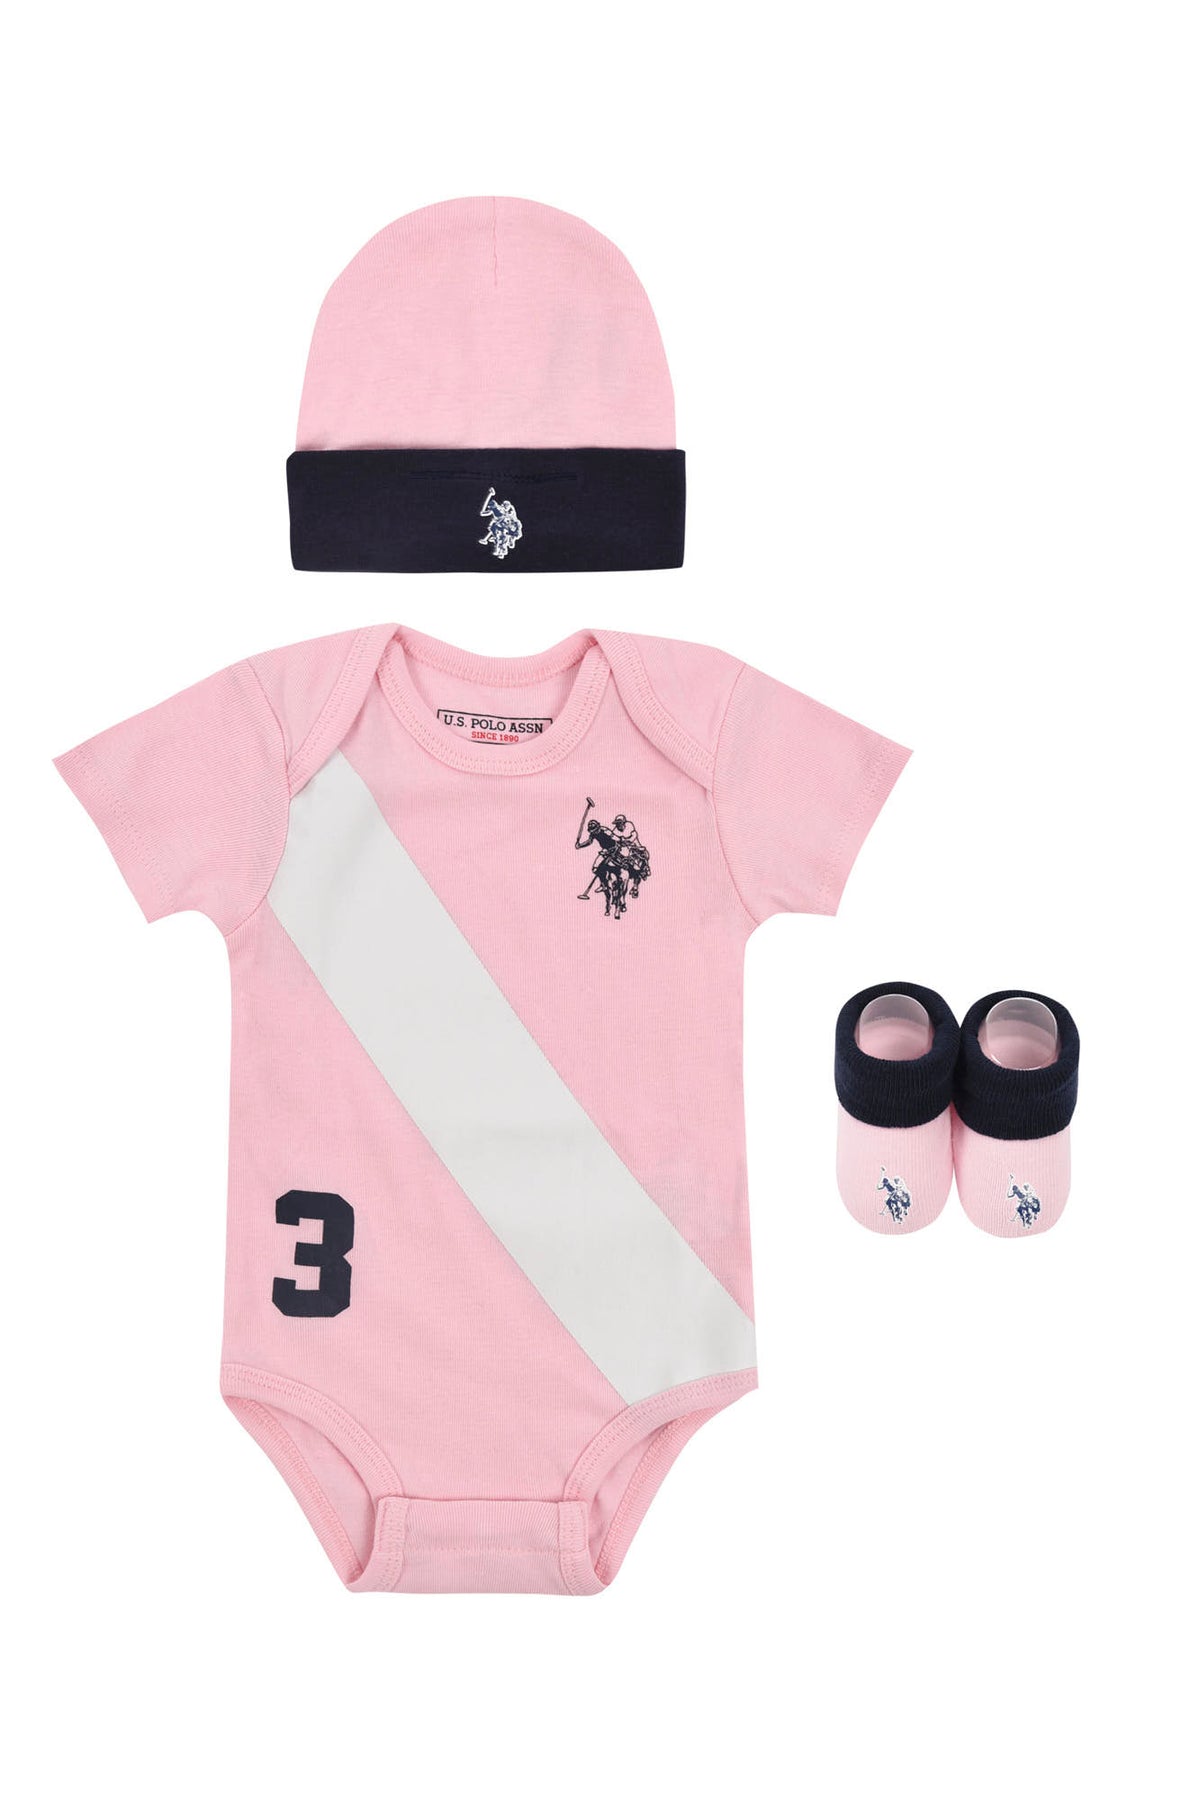 Baby 3 Piece Boxed Baby Gifting Set in Light Pink